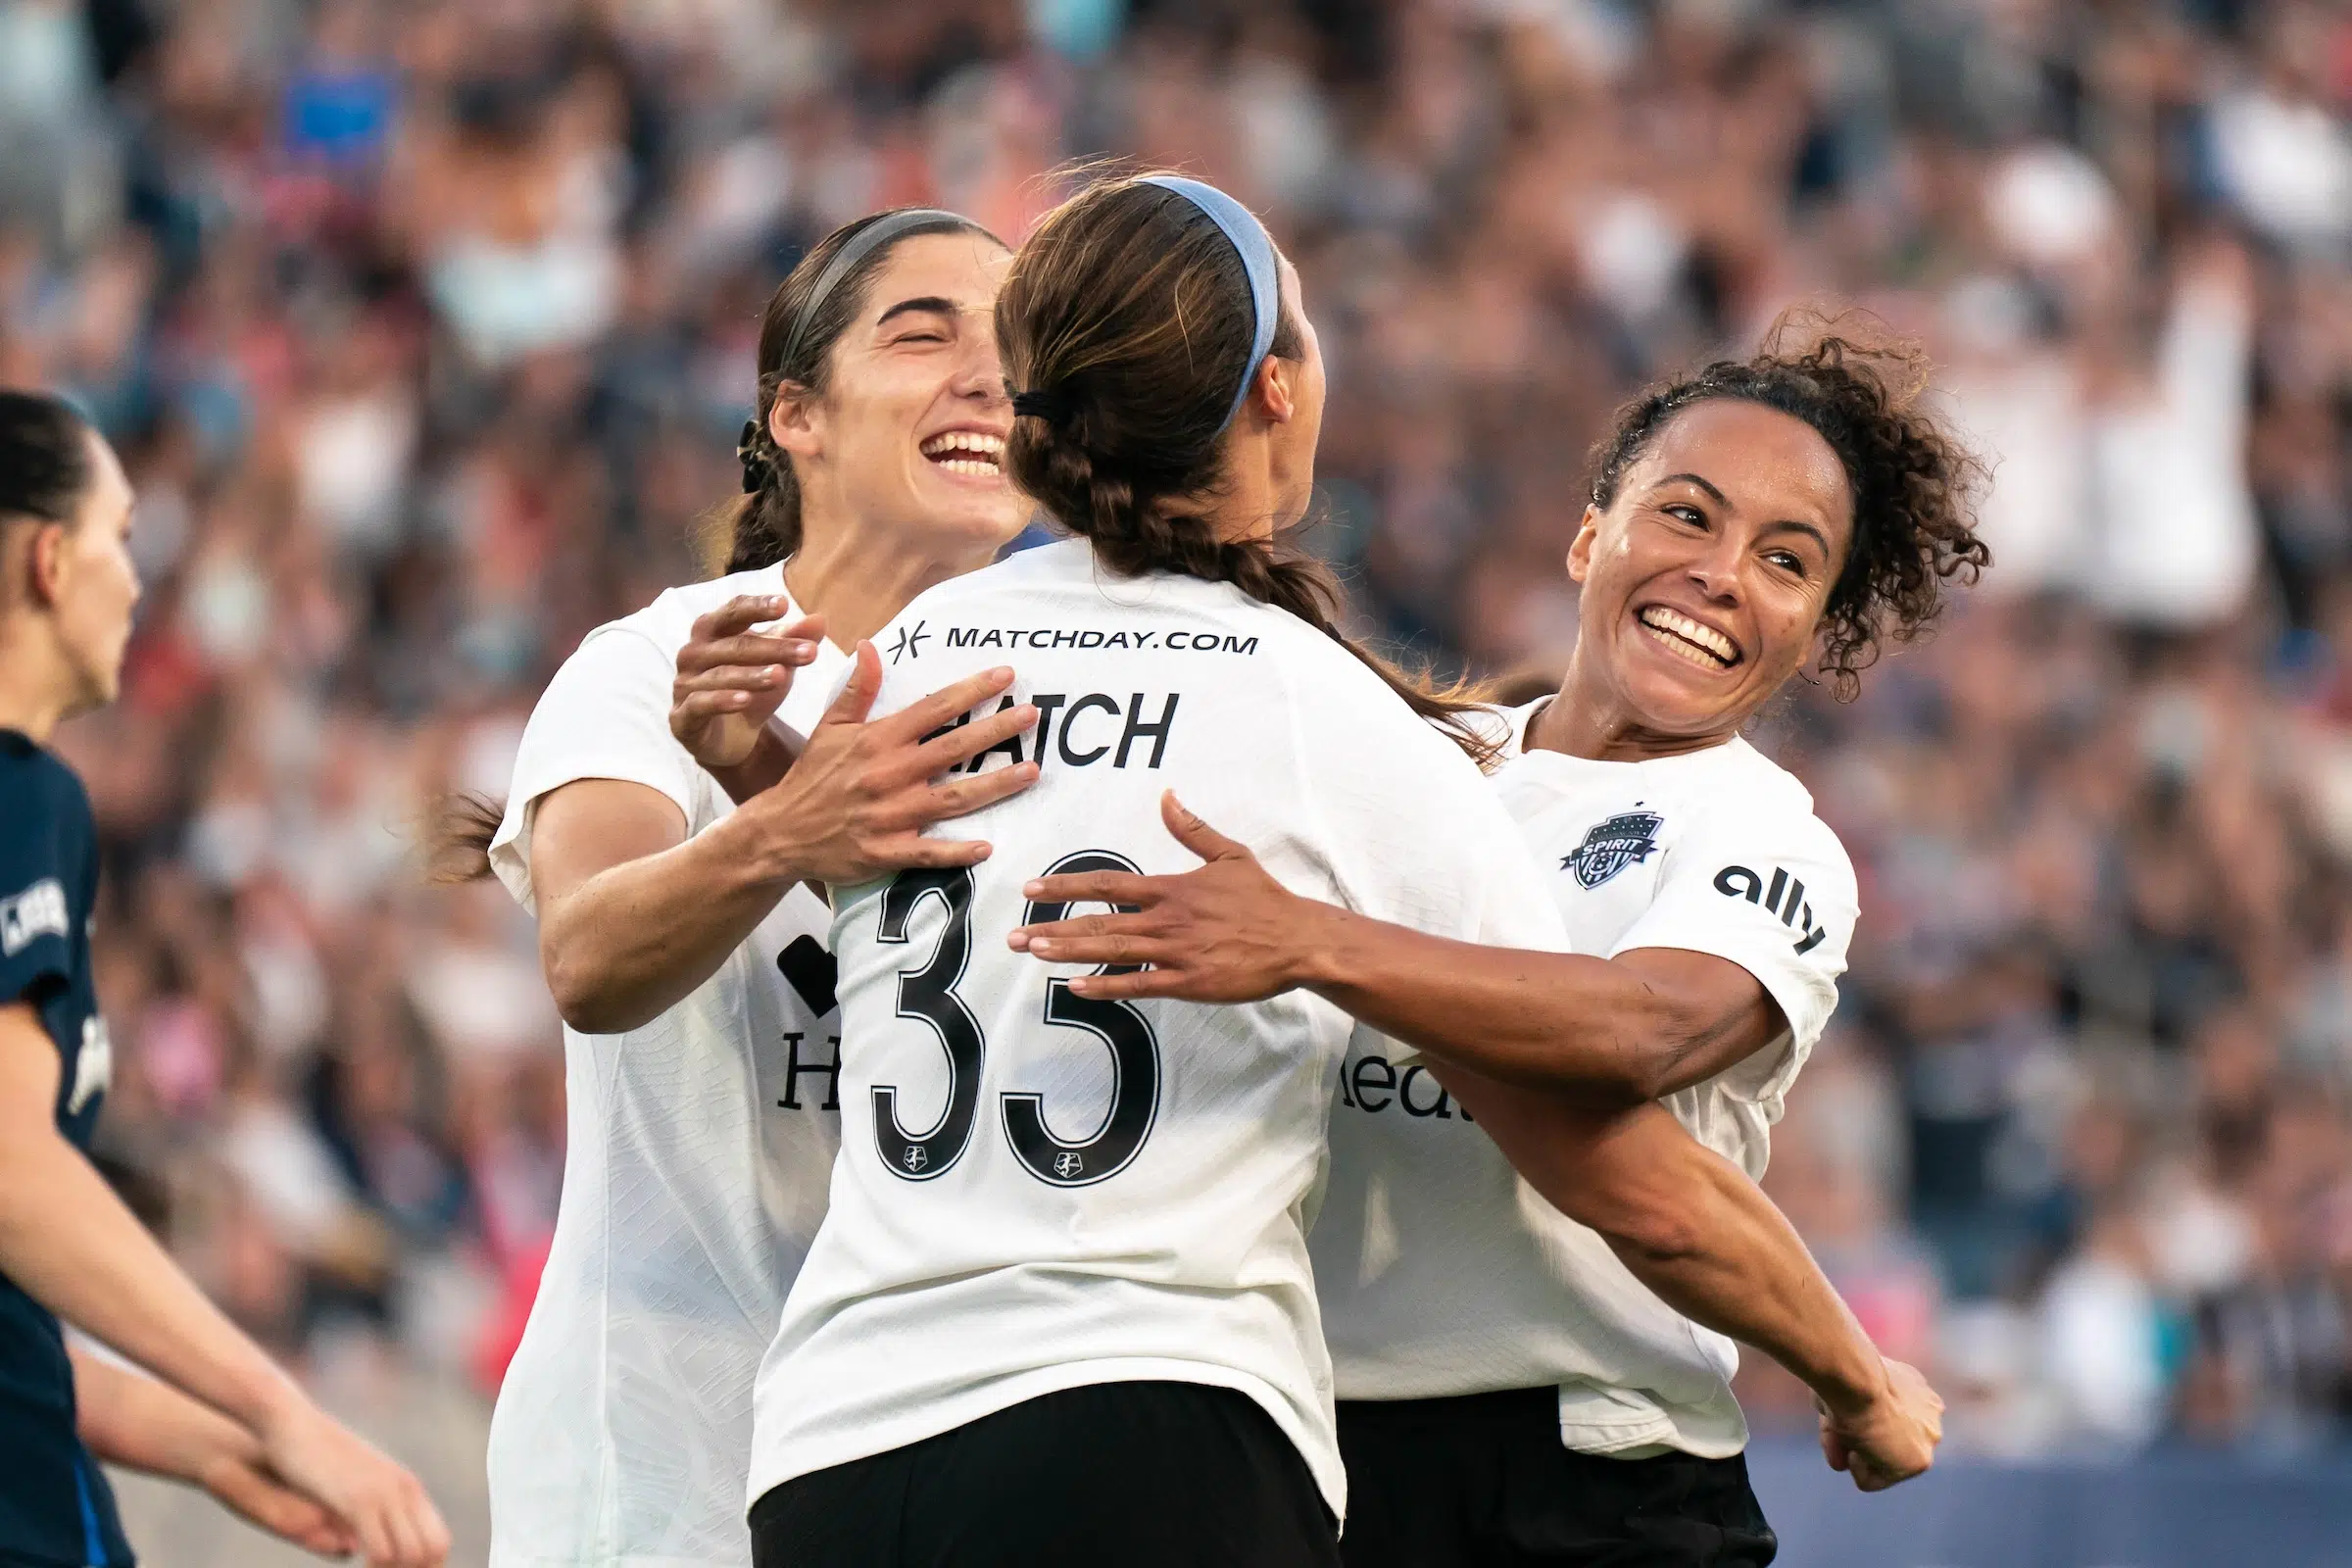 Three soccer players in white tops embrace and smile in celebration on a soccer field.